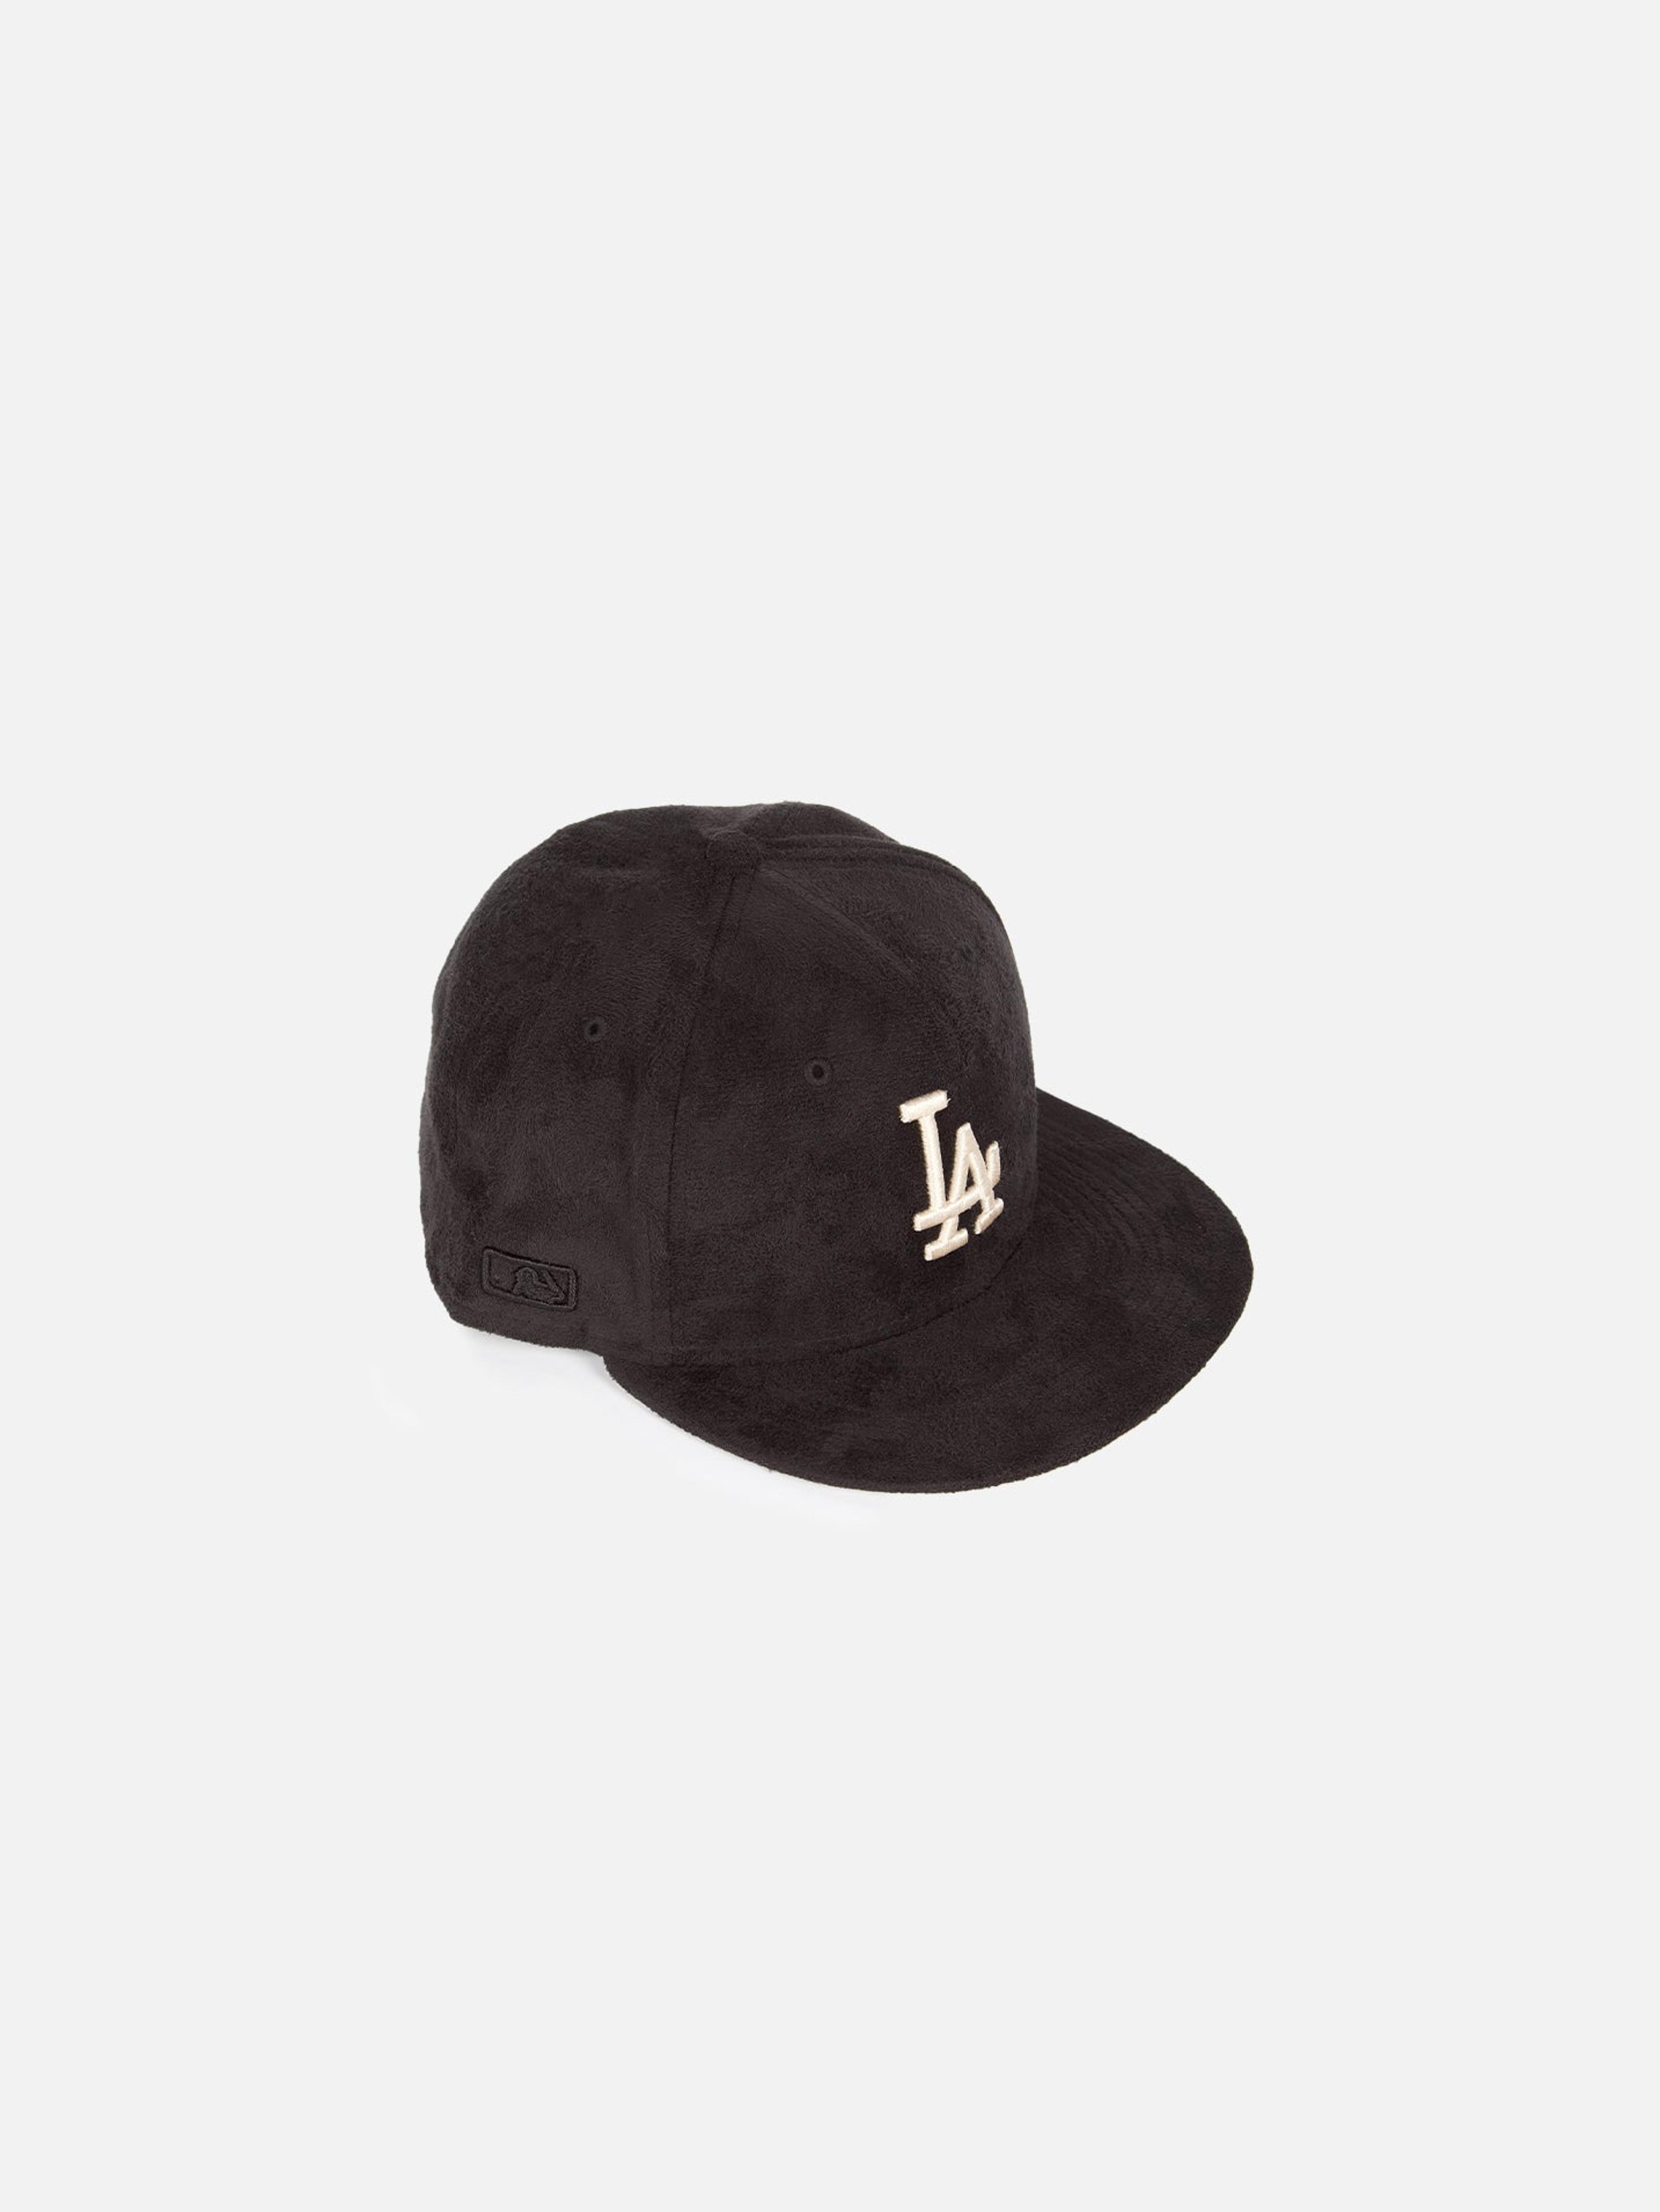 Alternate View 2 of Bricks & Wood x Dodgers New Era Fitted - Black Suede